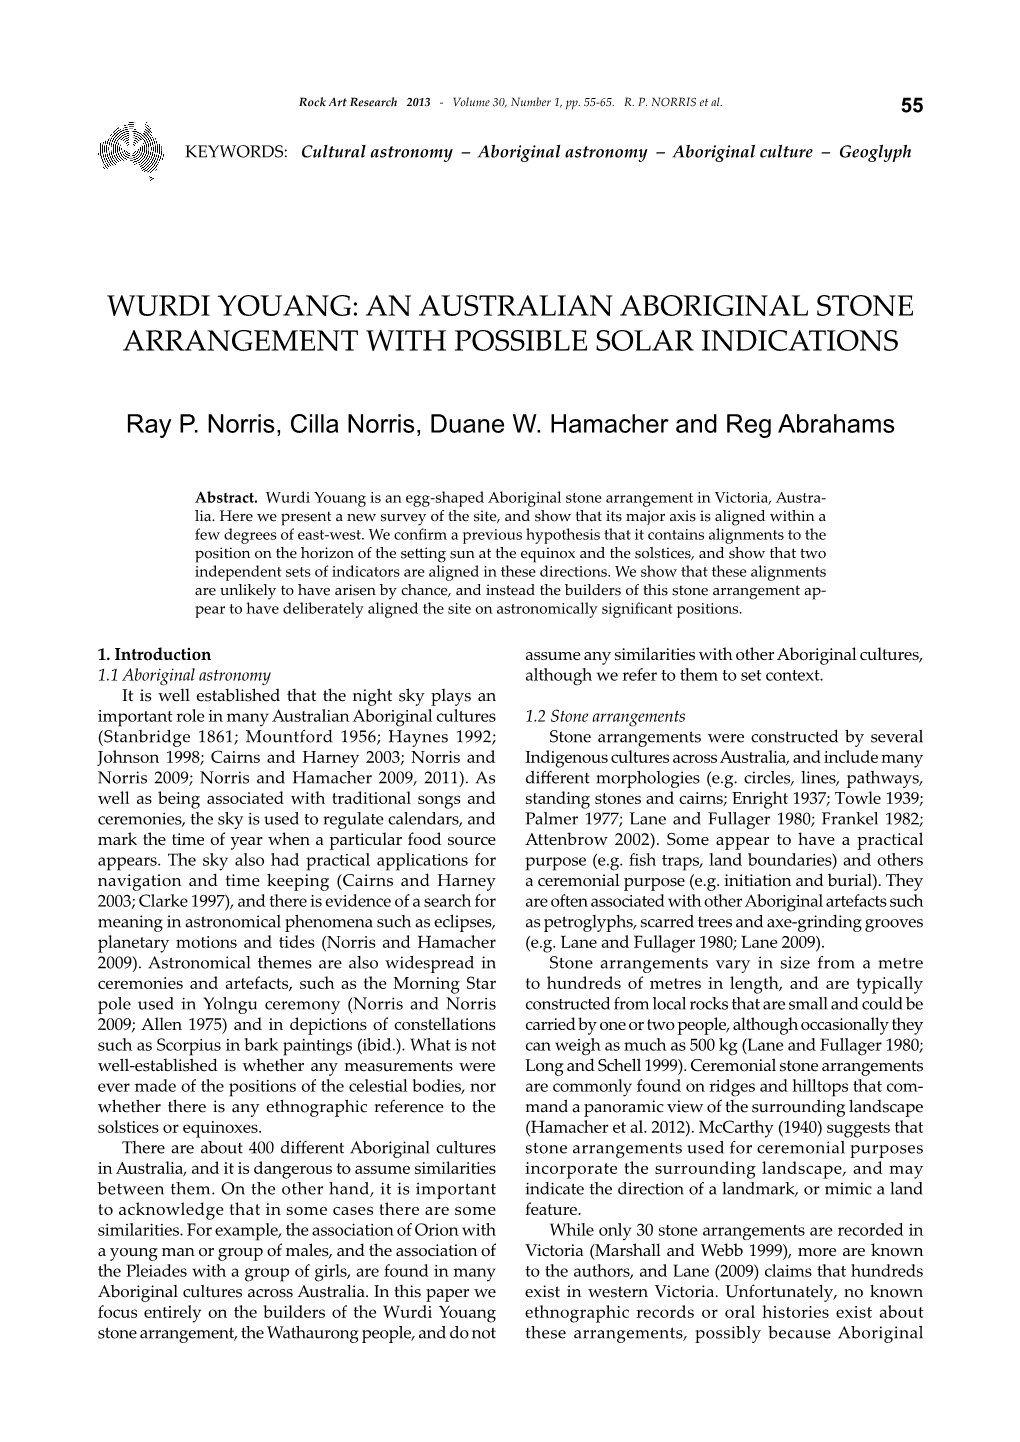 Wurdi Youang: an Australian Aboriginal Stone Arrangement with Possible Solar Indications